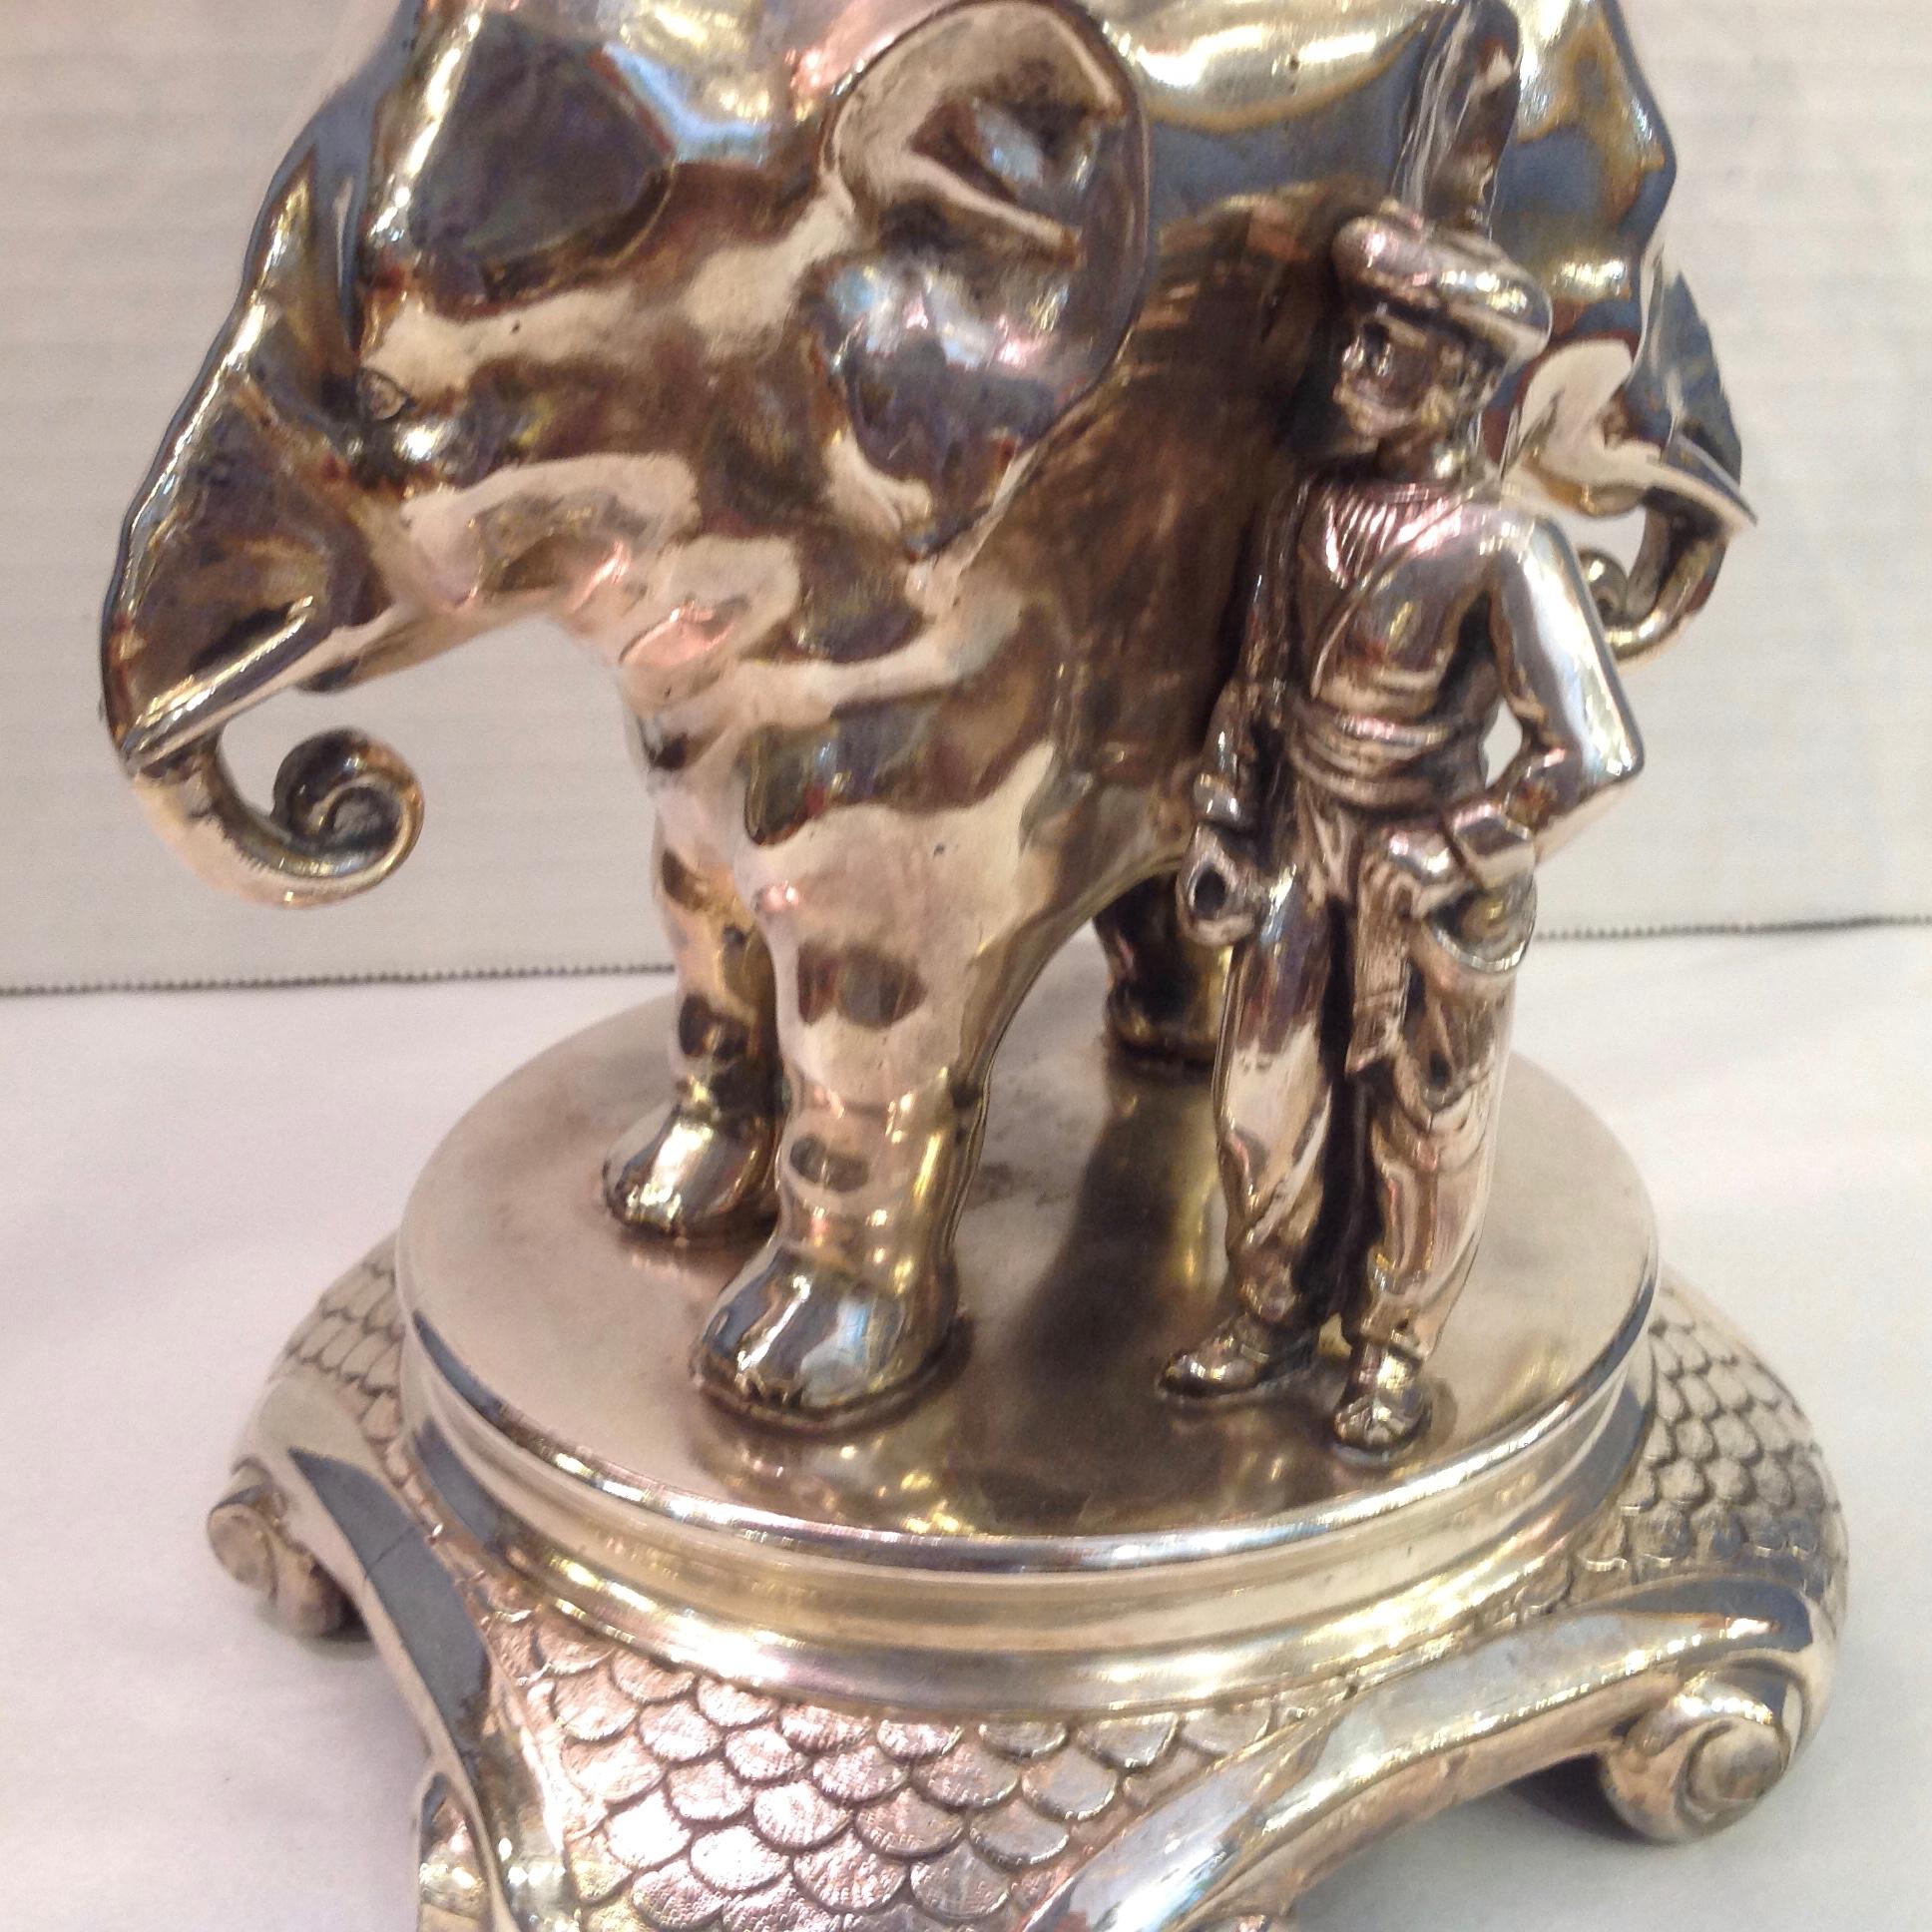 Superb 19th Century Anglo-Indian Style Elephant Motif Centerpiece / Epergne 1